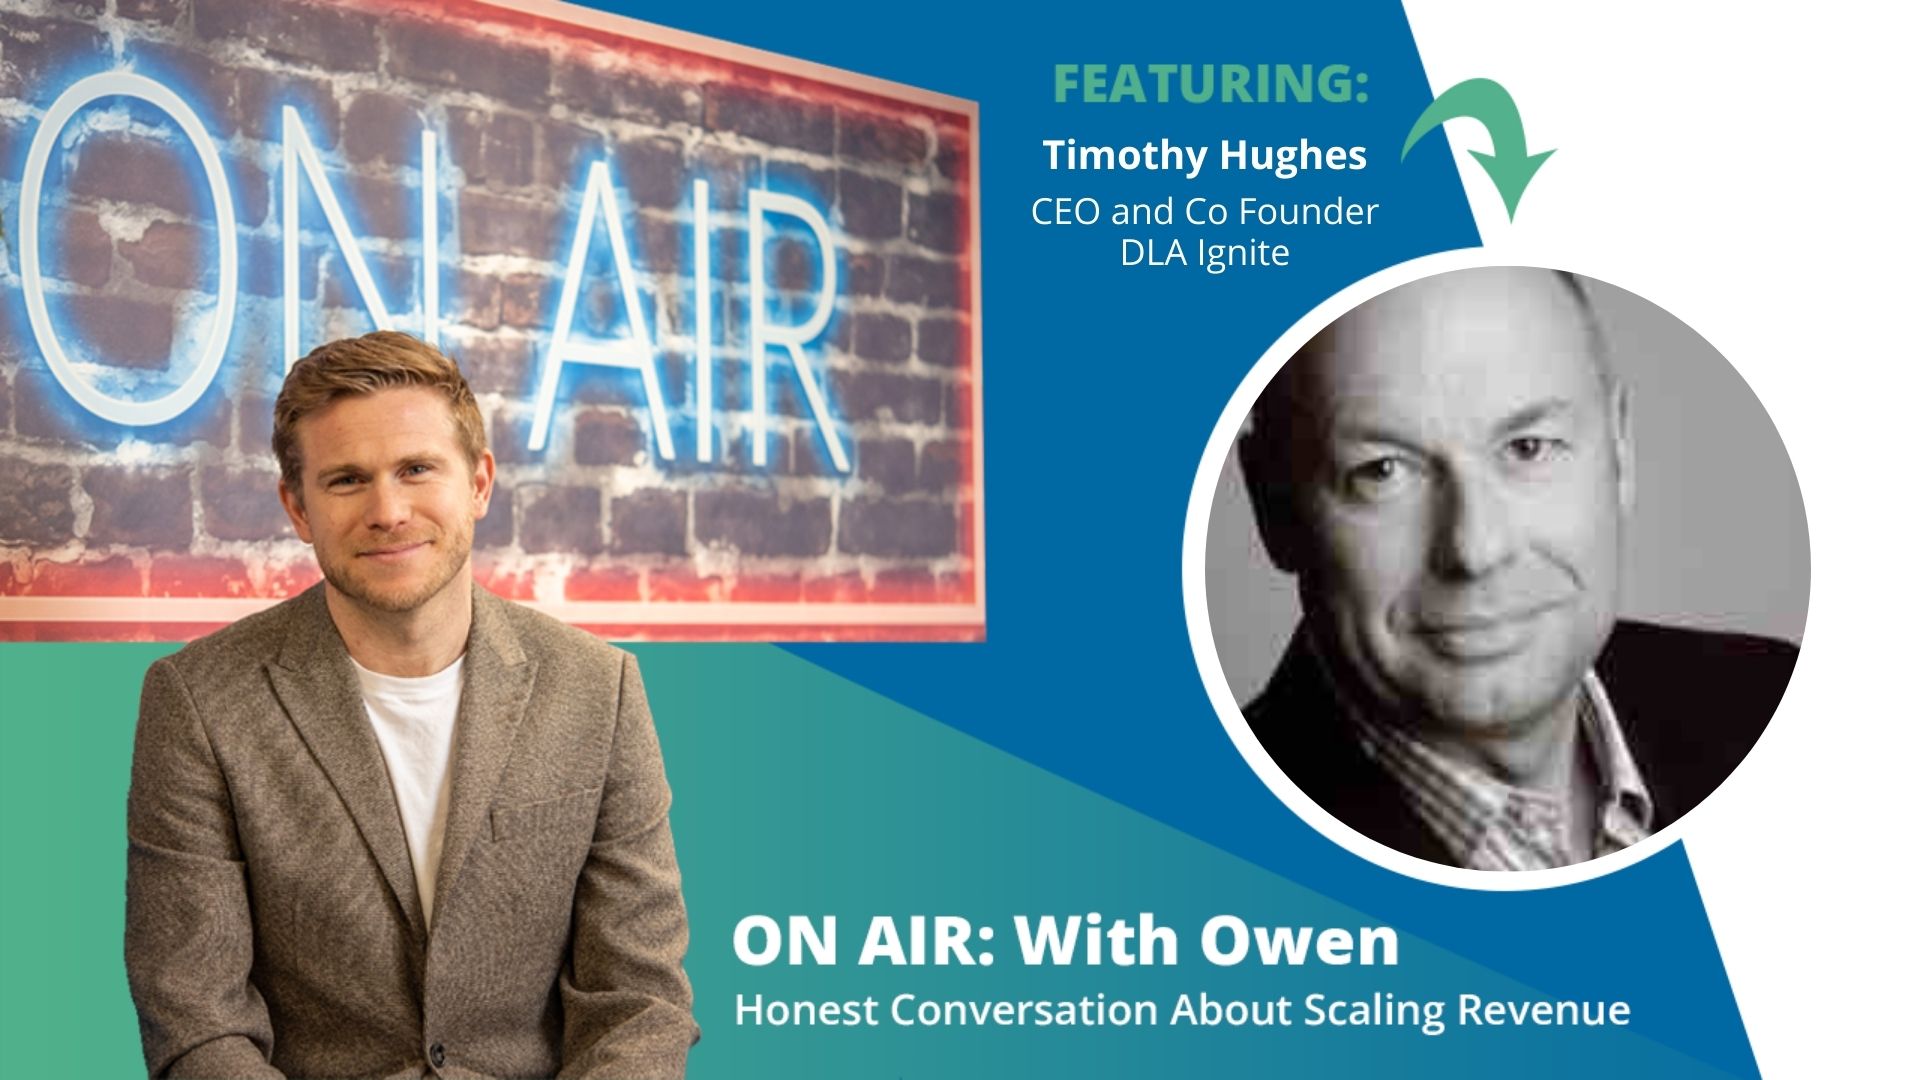 ON AIR: With Owen Episode 58 Featuring Tim Hughes – CEO and Co Founder at DLA Ignite